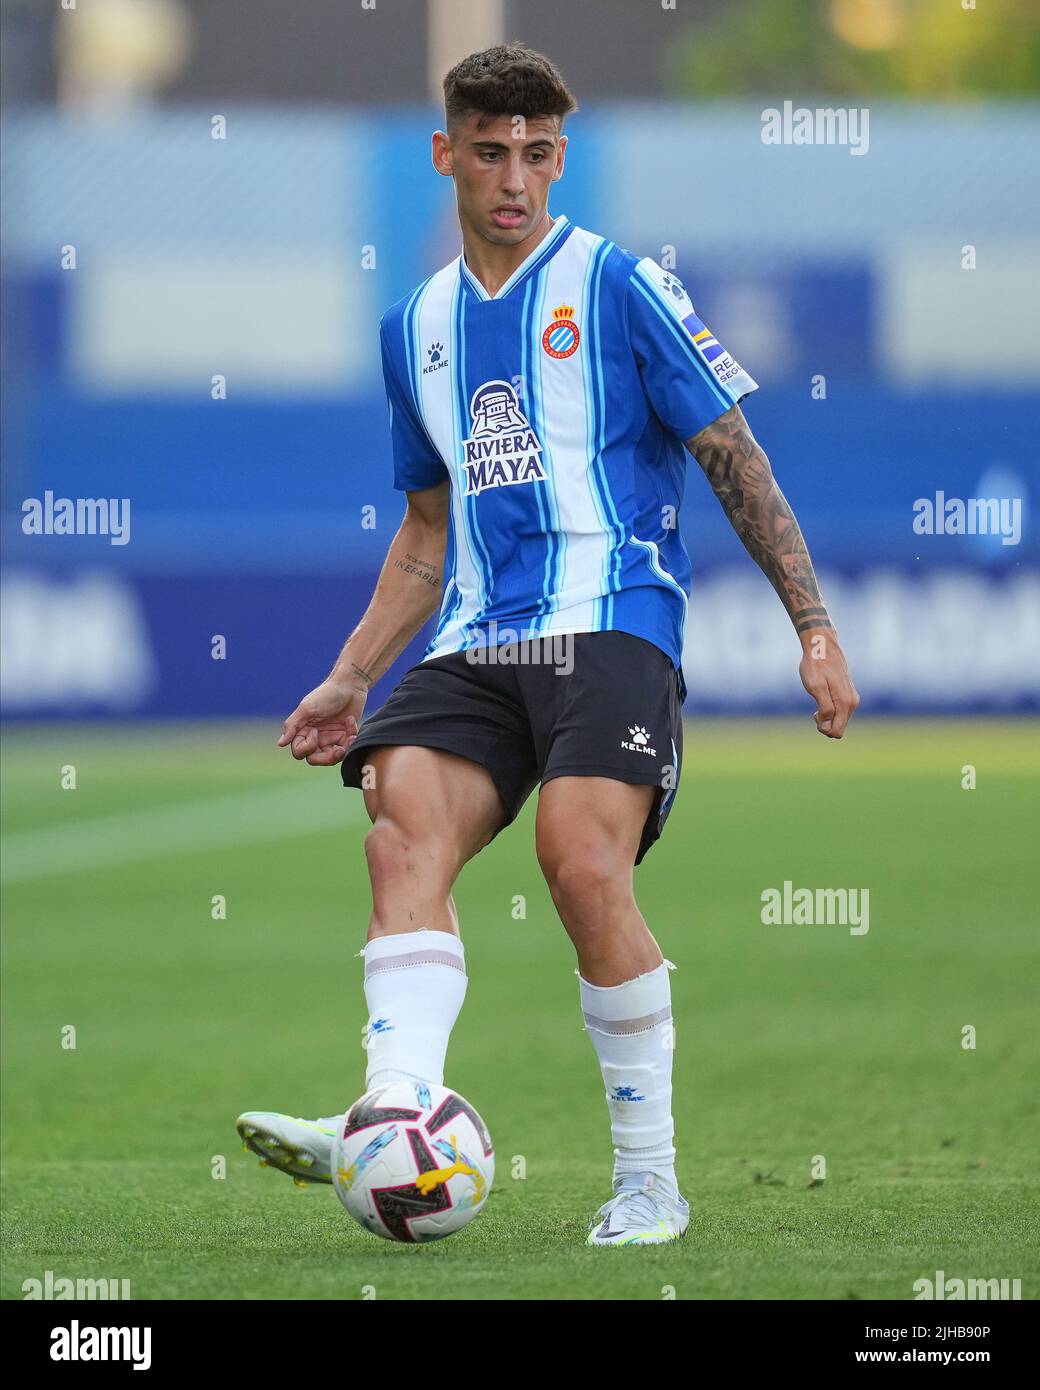 Ruben Sanchez of RCD during the match between RCD Espanyol and Herault Sport Club played at Ciutat Deportiva Dani Jarque on July 16, 2022 in Barcelona, Spain. (Photo by